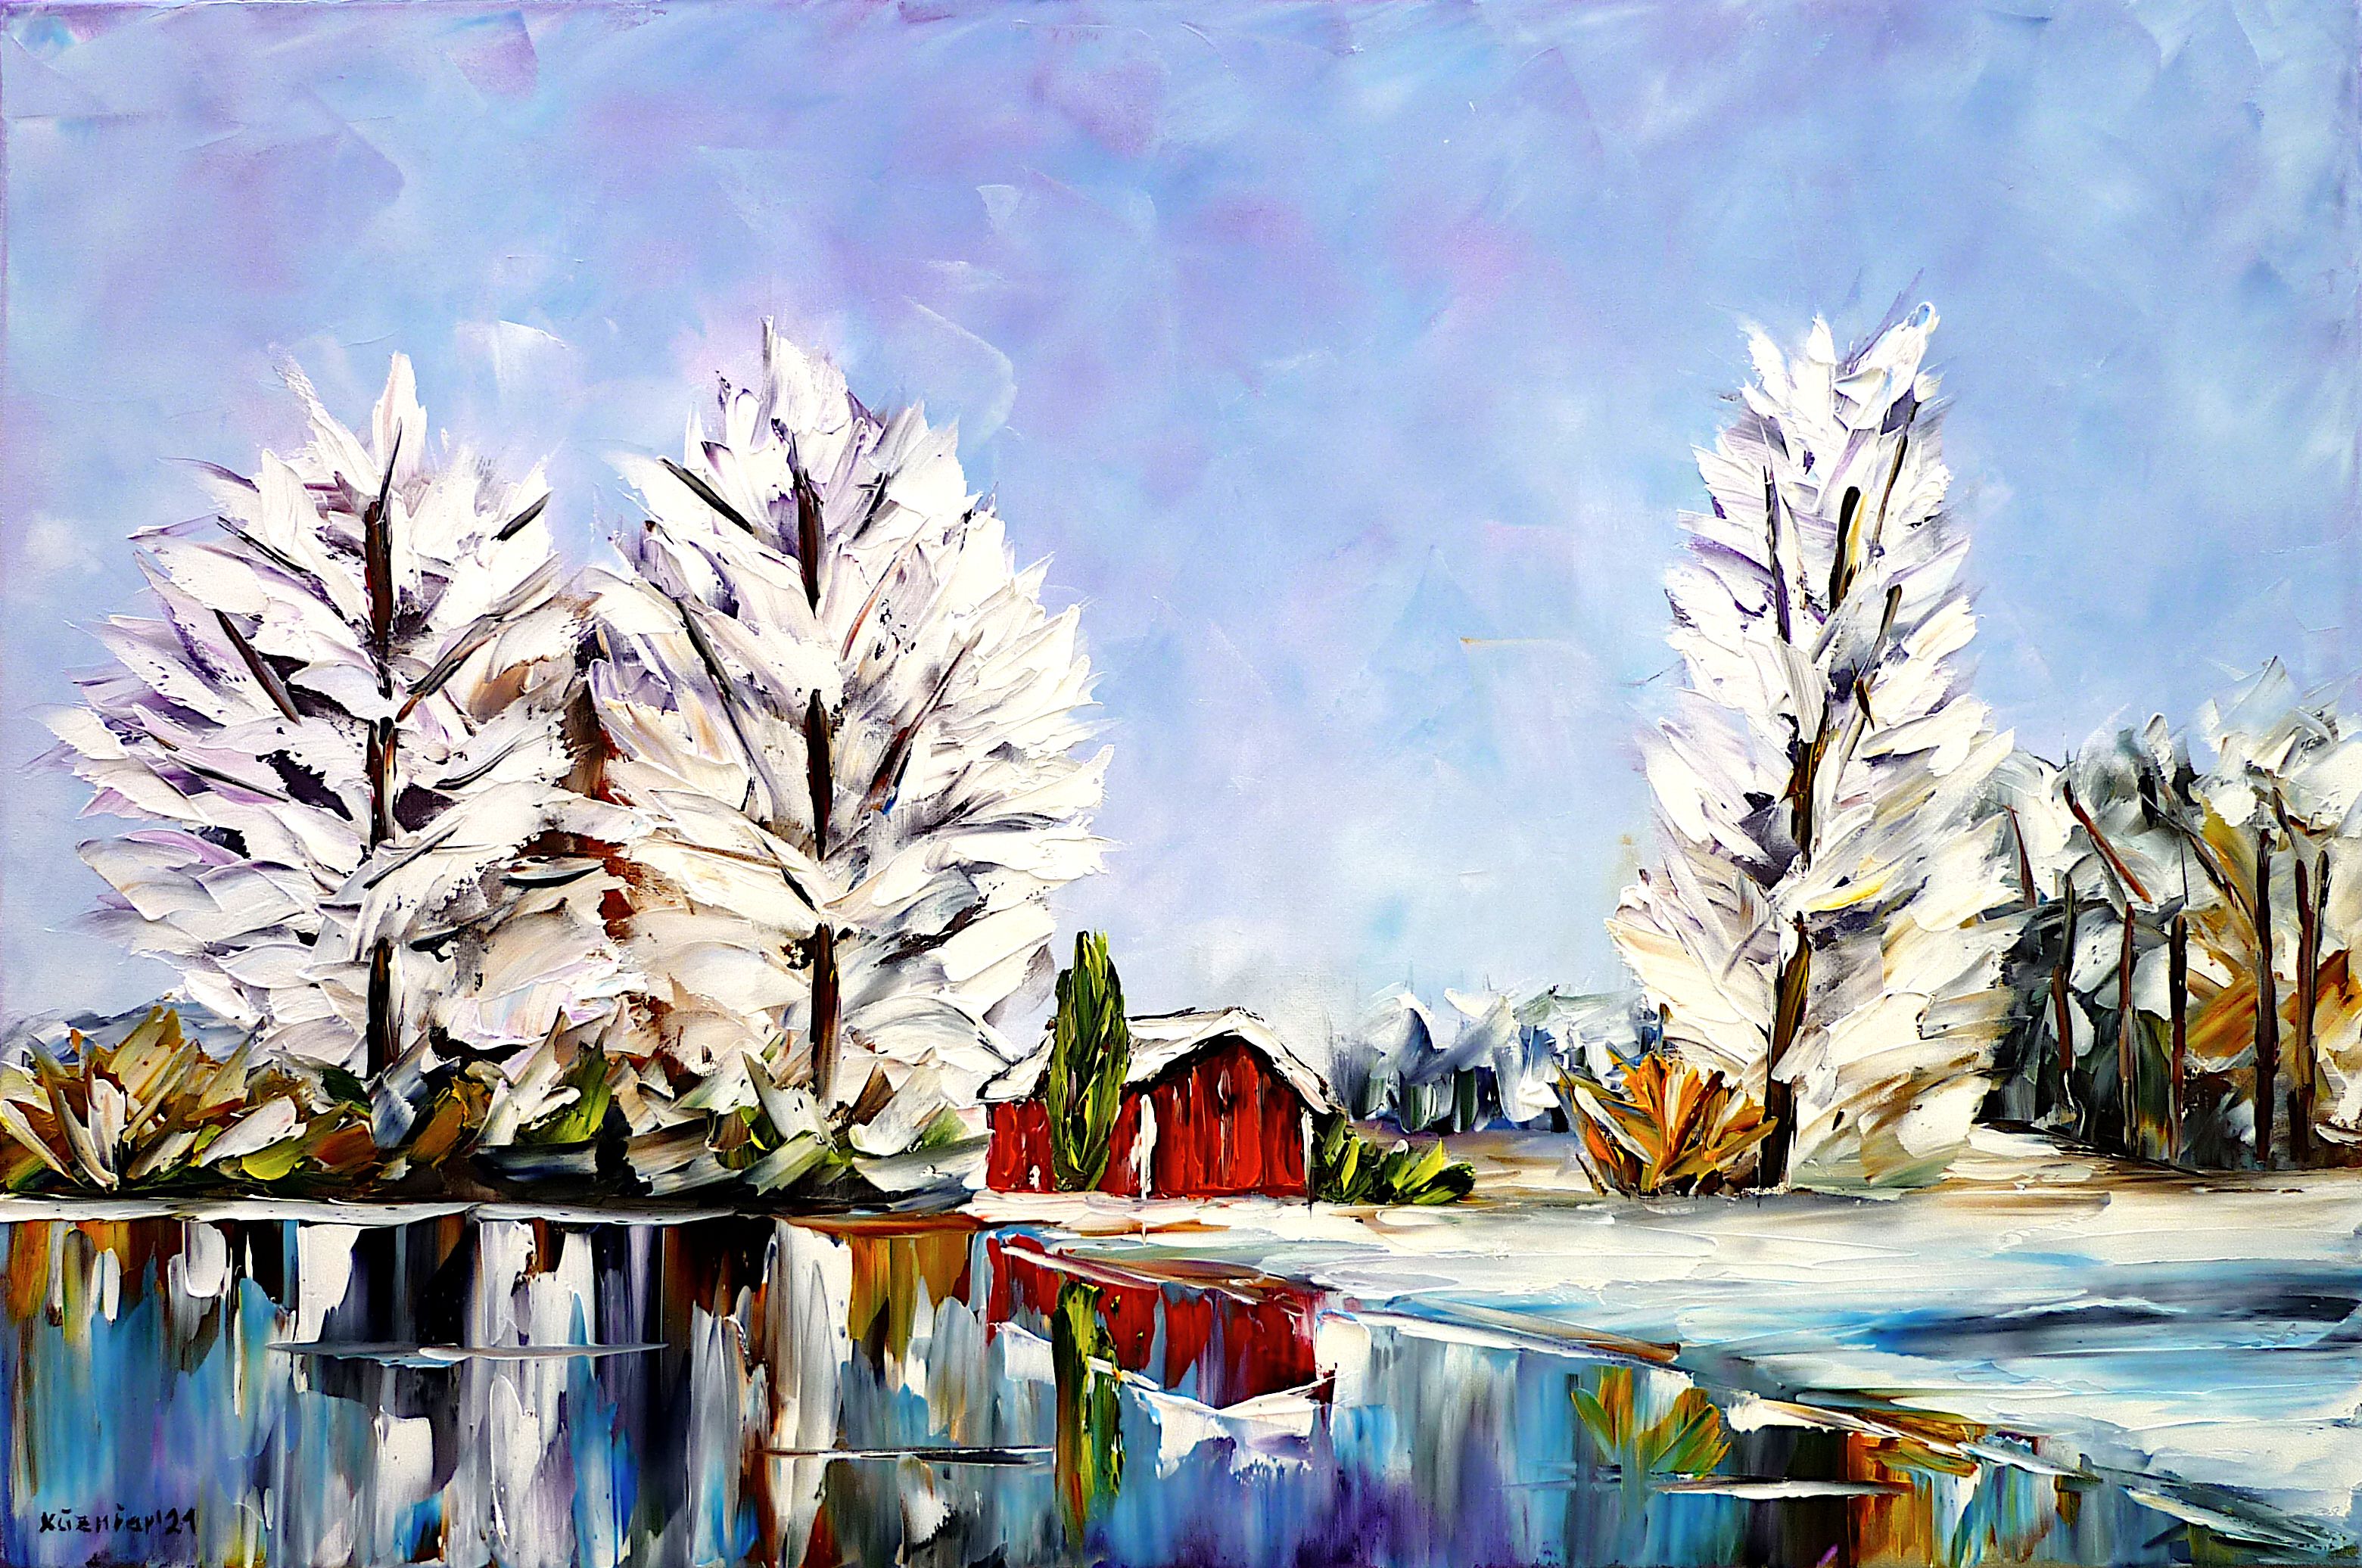 lakescape,lake in winter,house by the lake,red house,barn,red hut,wooden hut by the lake,water reflections,bright winter day,landscape picture,landscape painting,christmas mood,winter trees,white landscape,winter landscape,sunny winter day,winter and snow,snowy landscape,christmas feelings,winter beauty,winter sky,winter picture,winter painting,snowy trees,white winter,christmas time,winter love,white trees,palette knife oil painting,modern art,impressionism,abstract painting,lively colours,colorful painting,bright colors,light reflections,impasto painting,figurative